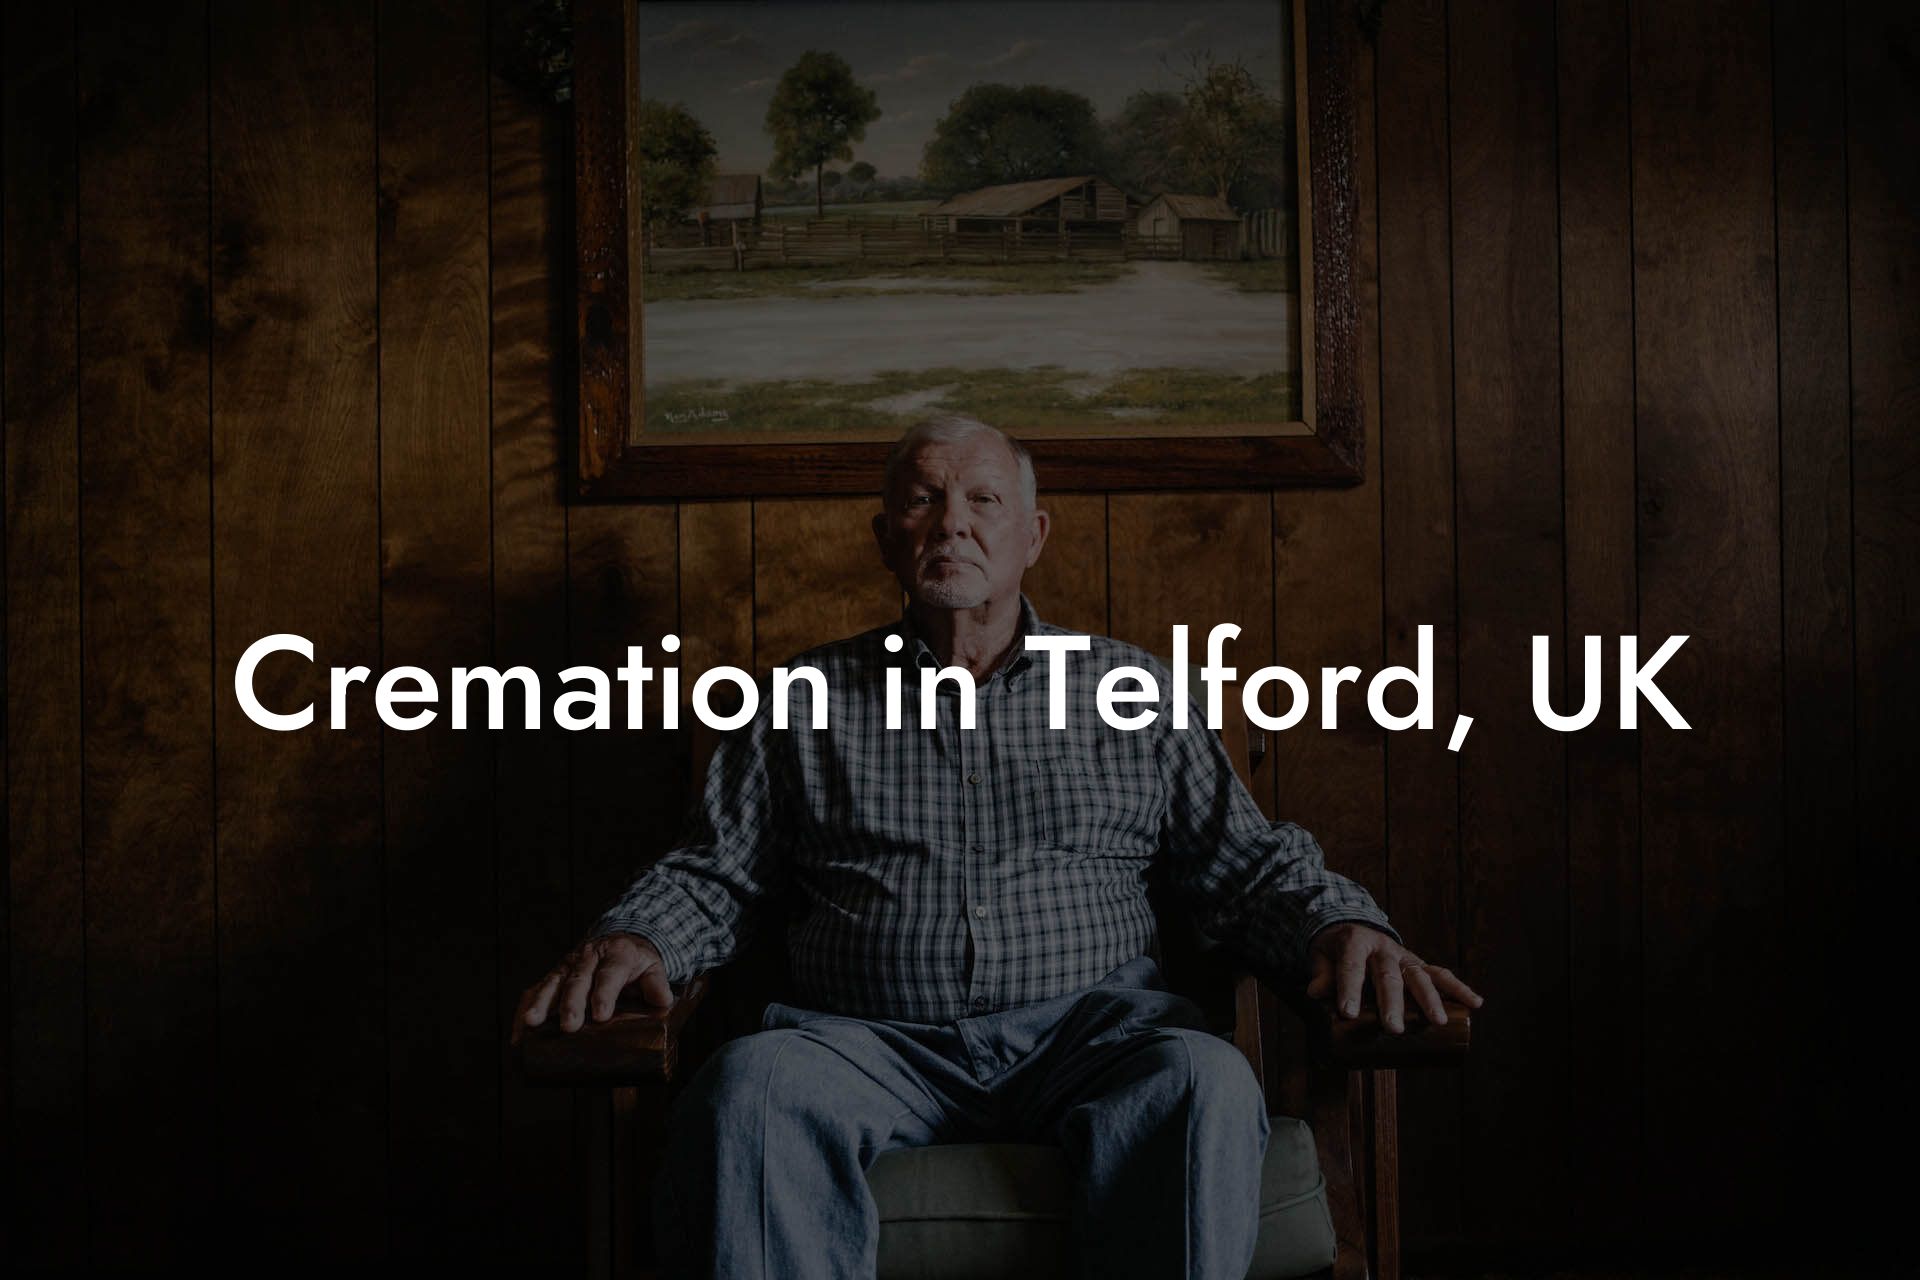 Cremation in Telford, UK